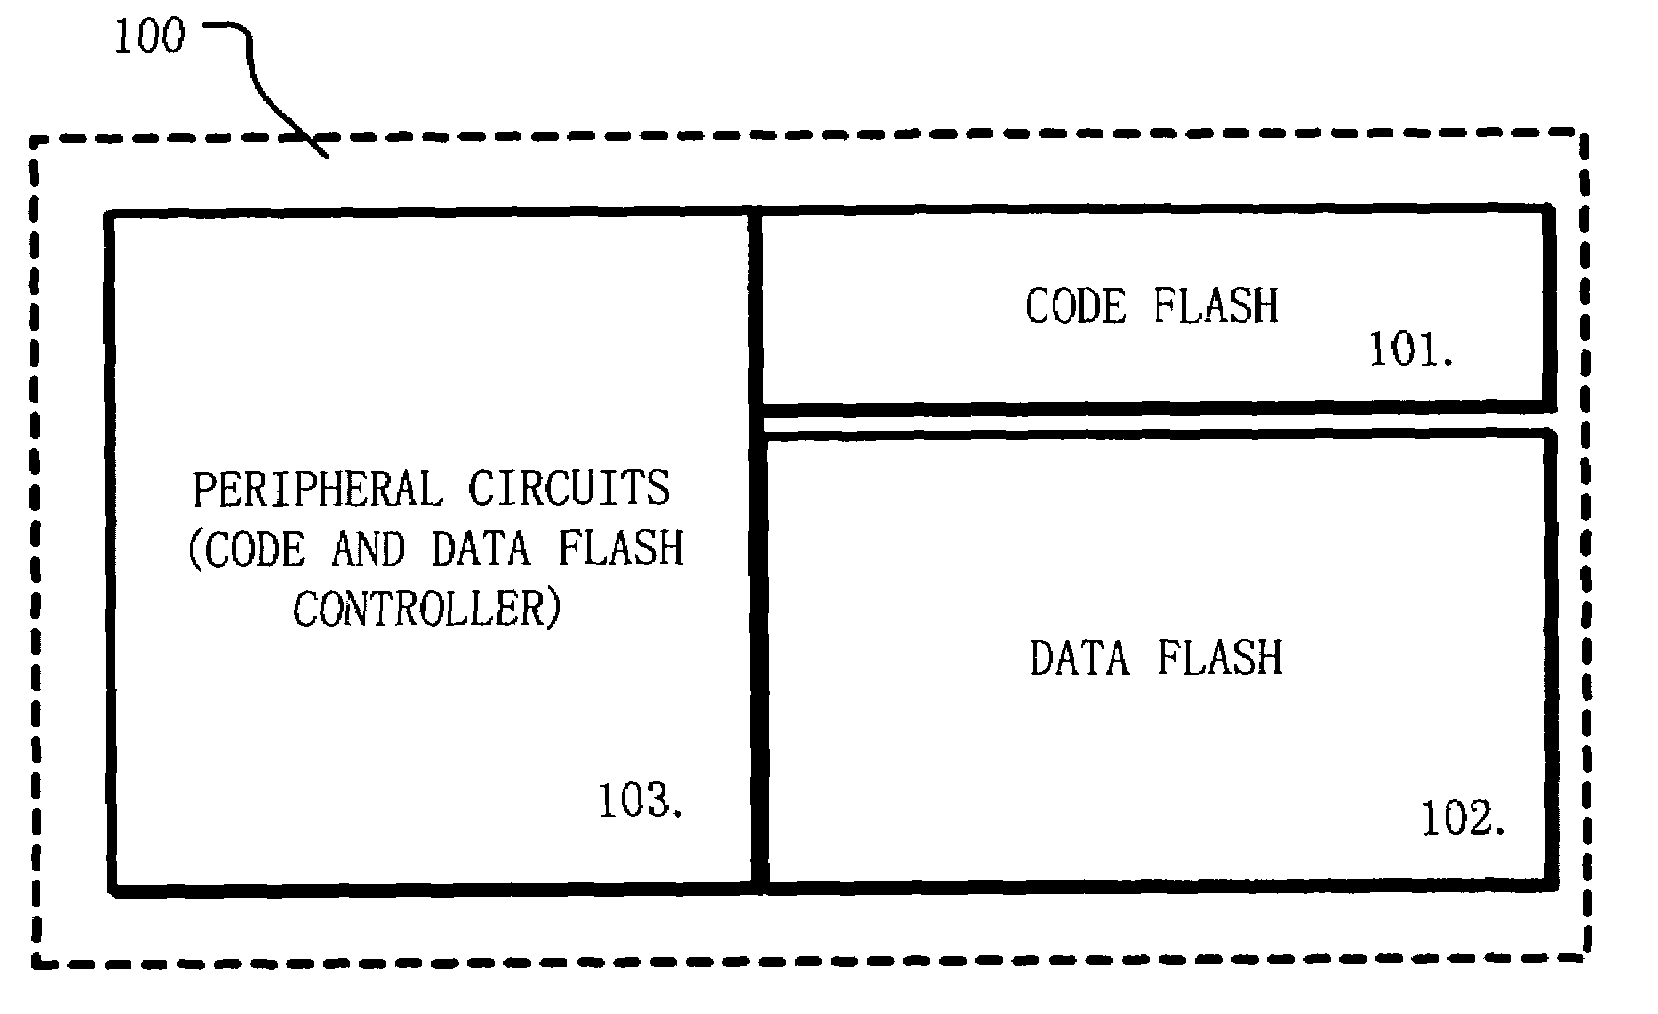 Integrated code and data flash memory